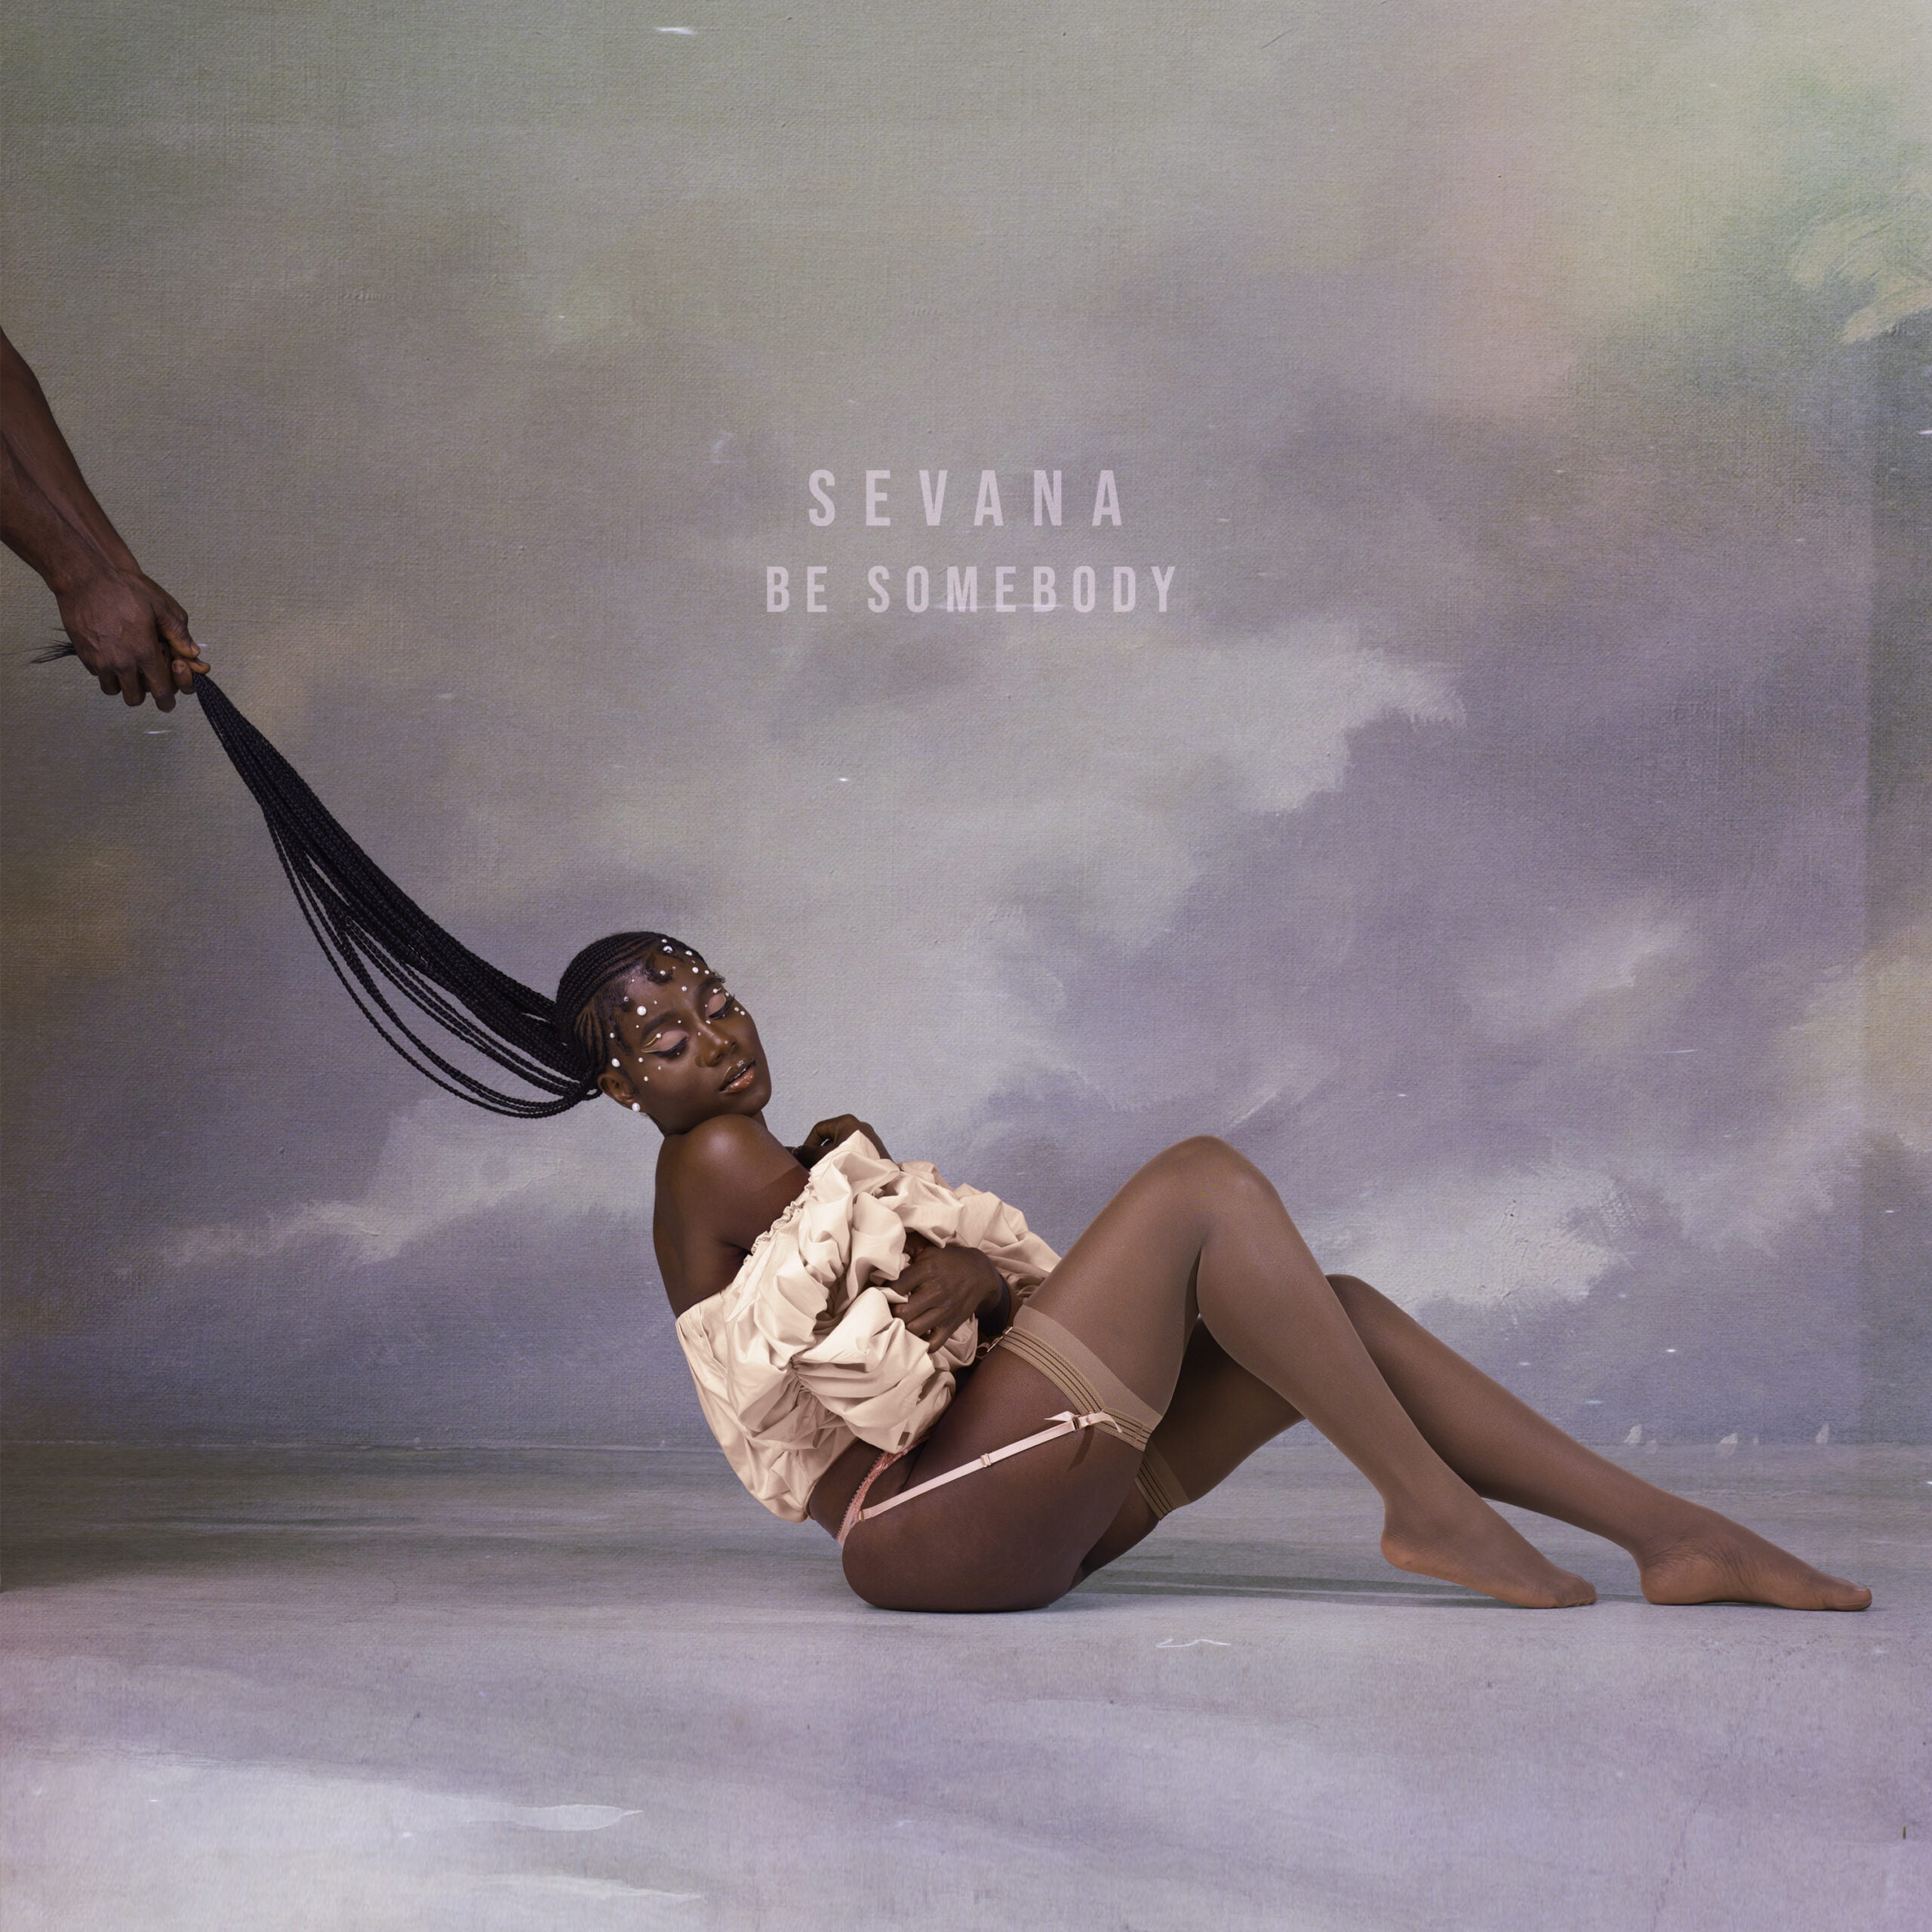 SEVANA UNVEILS “BLESSED” VIDEO FROM HER LATEST EP BE SOMEBODY